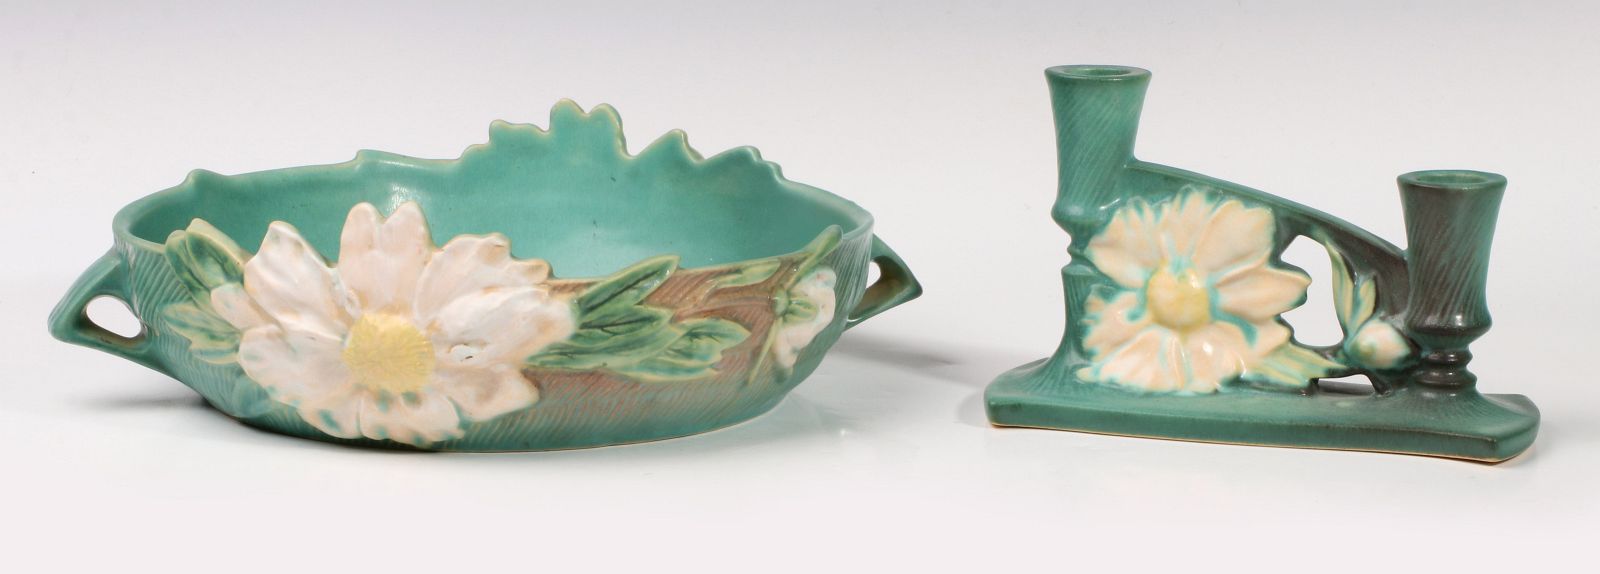 ROSEVILLE 'PEONY' ART POTTERY BOWL AND CANDLESTICK